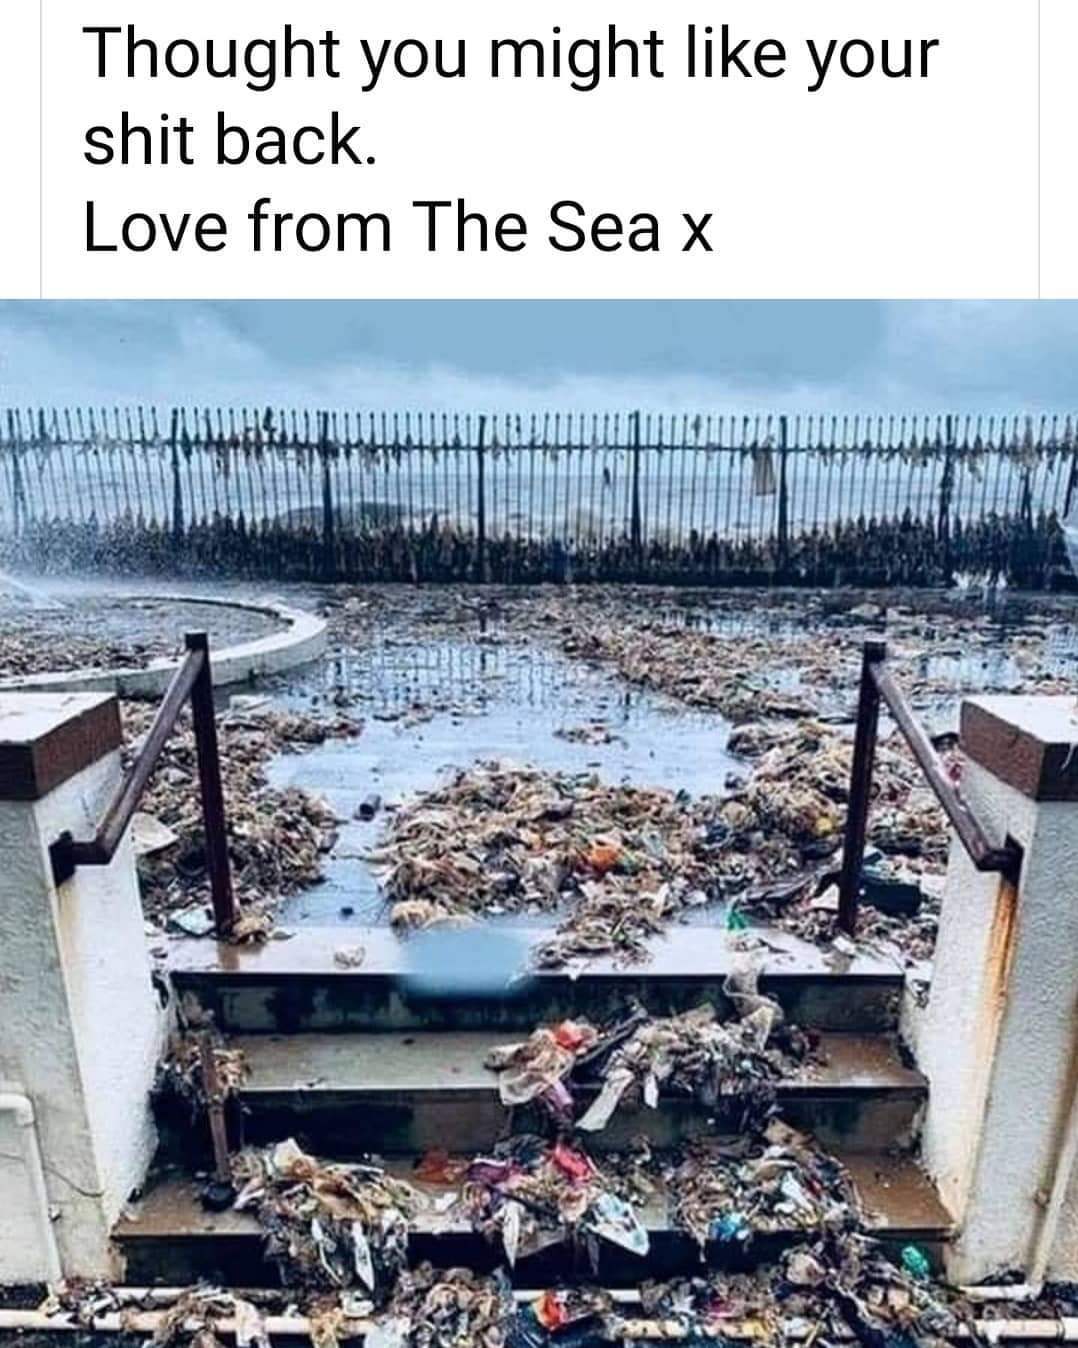 ocean gives back trash - Thought you might your shit back Love from The Sea x